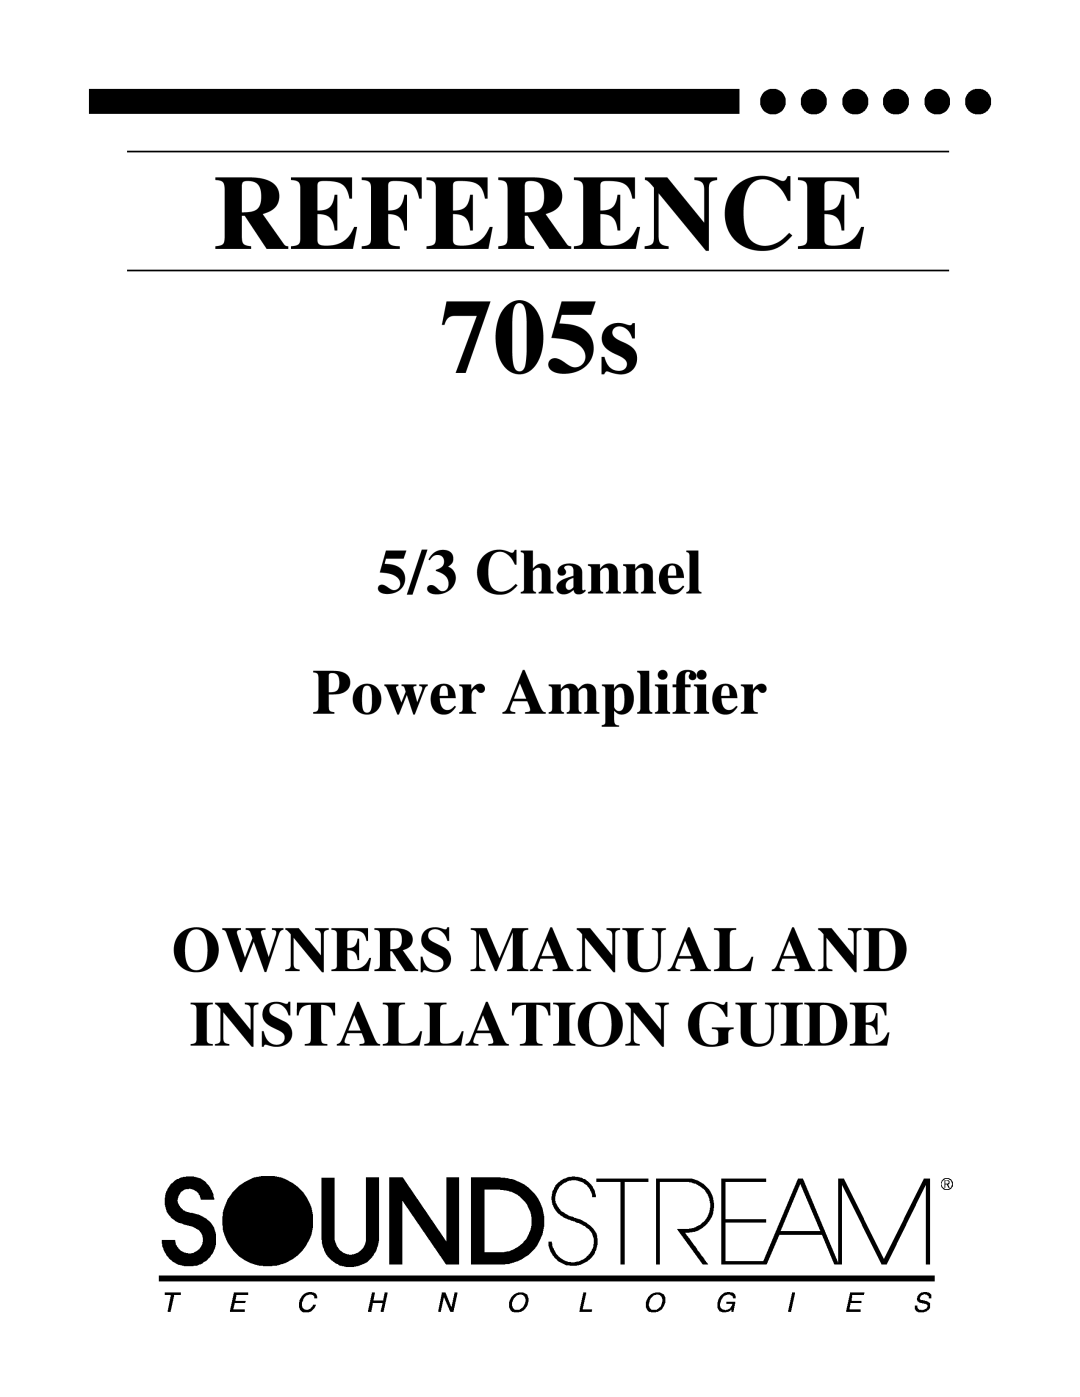 Soundstream Technologies owner manual REFERENCE 705s, 5/3 Channel Power Amplifier 